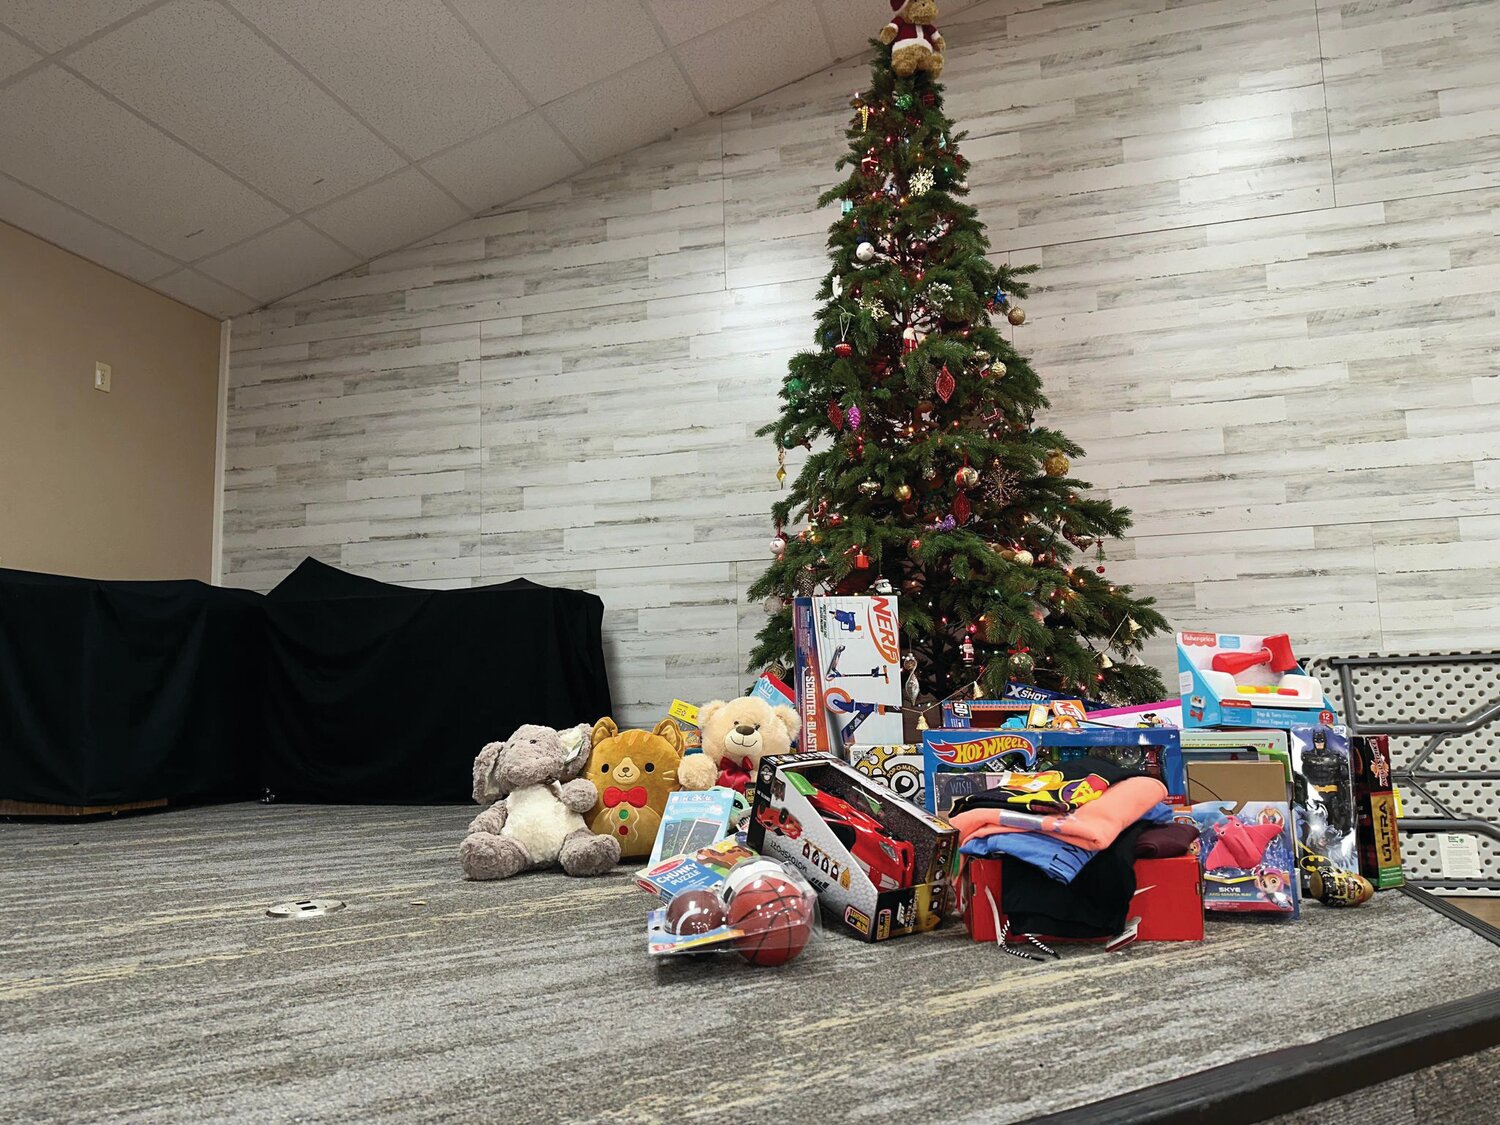 Yelm football’s toy donation sit in front of a Christmas tree on Nov. 24 at the Nisqually Valley Moose Lodge in Yelm.